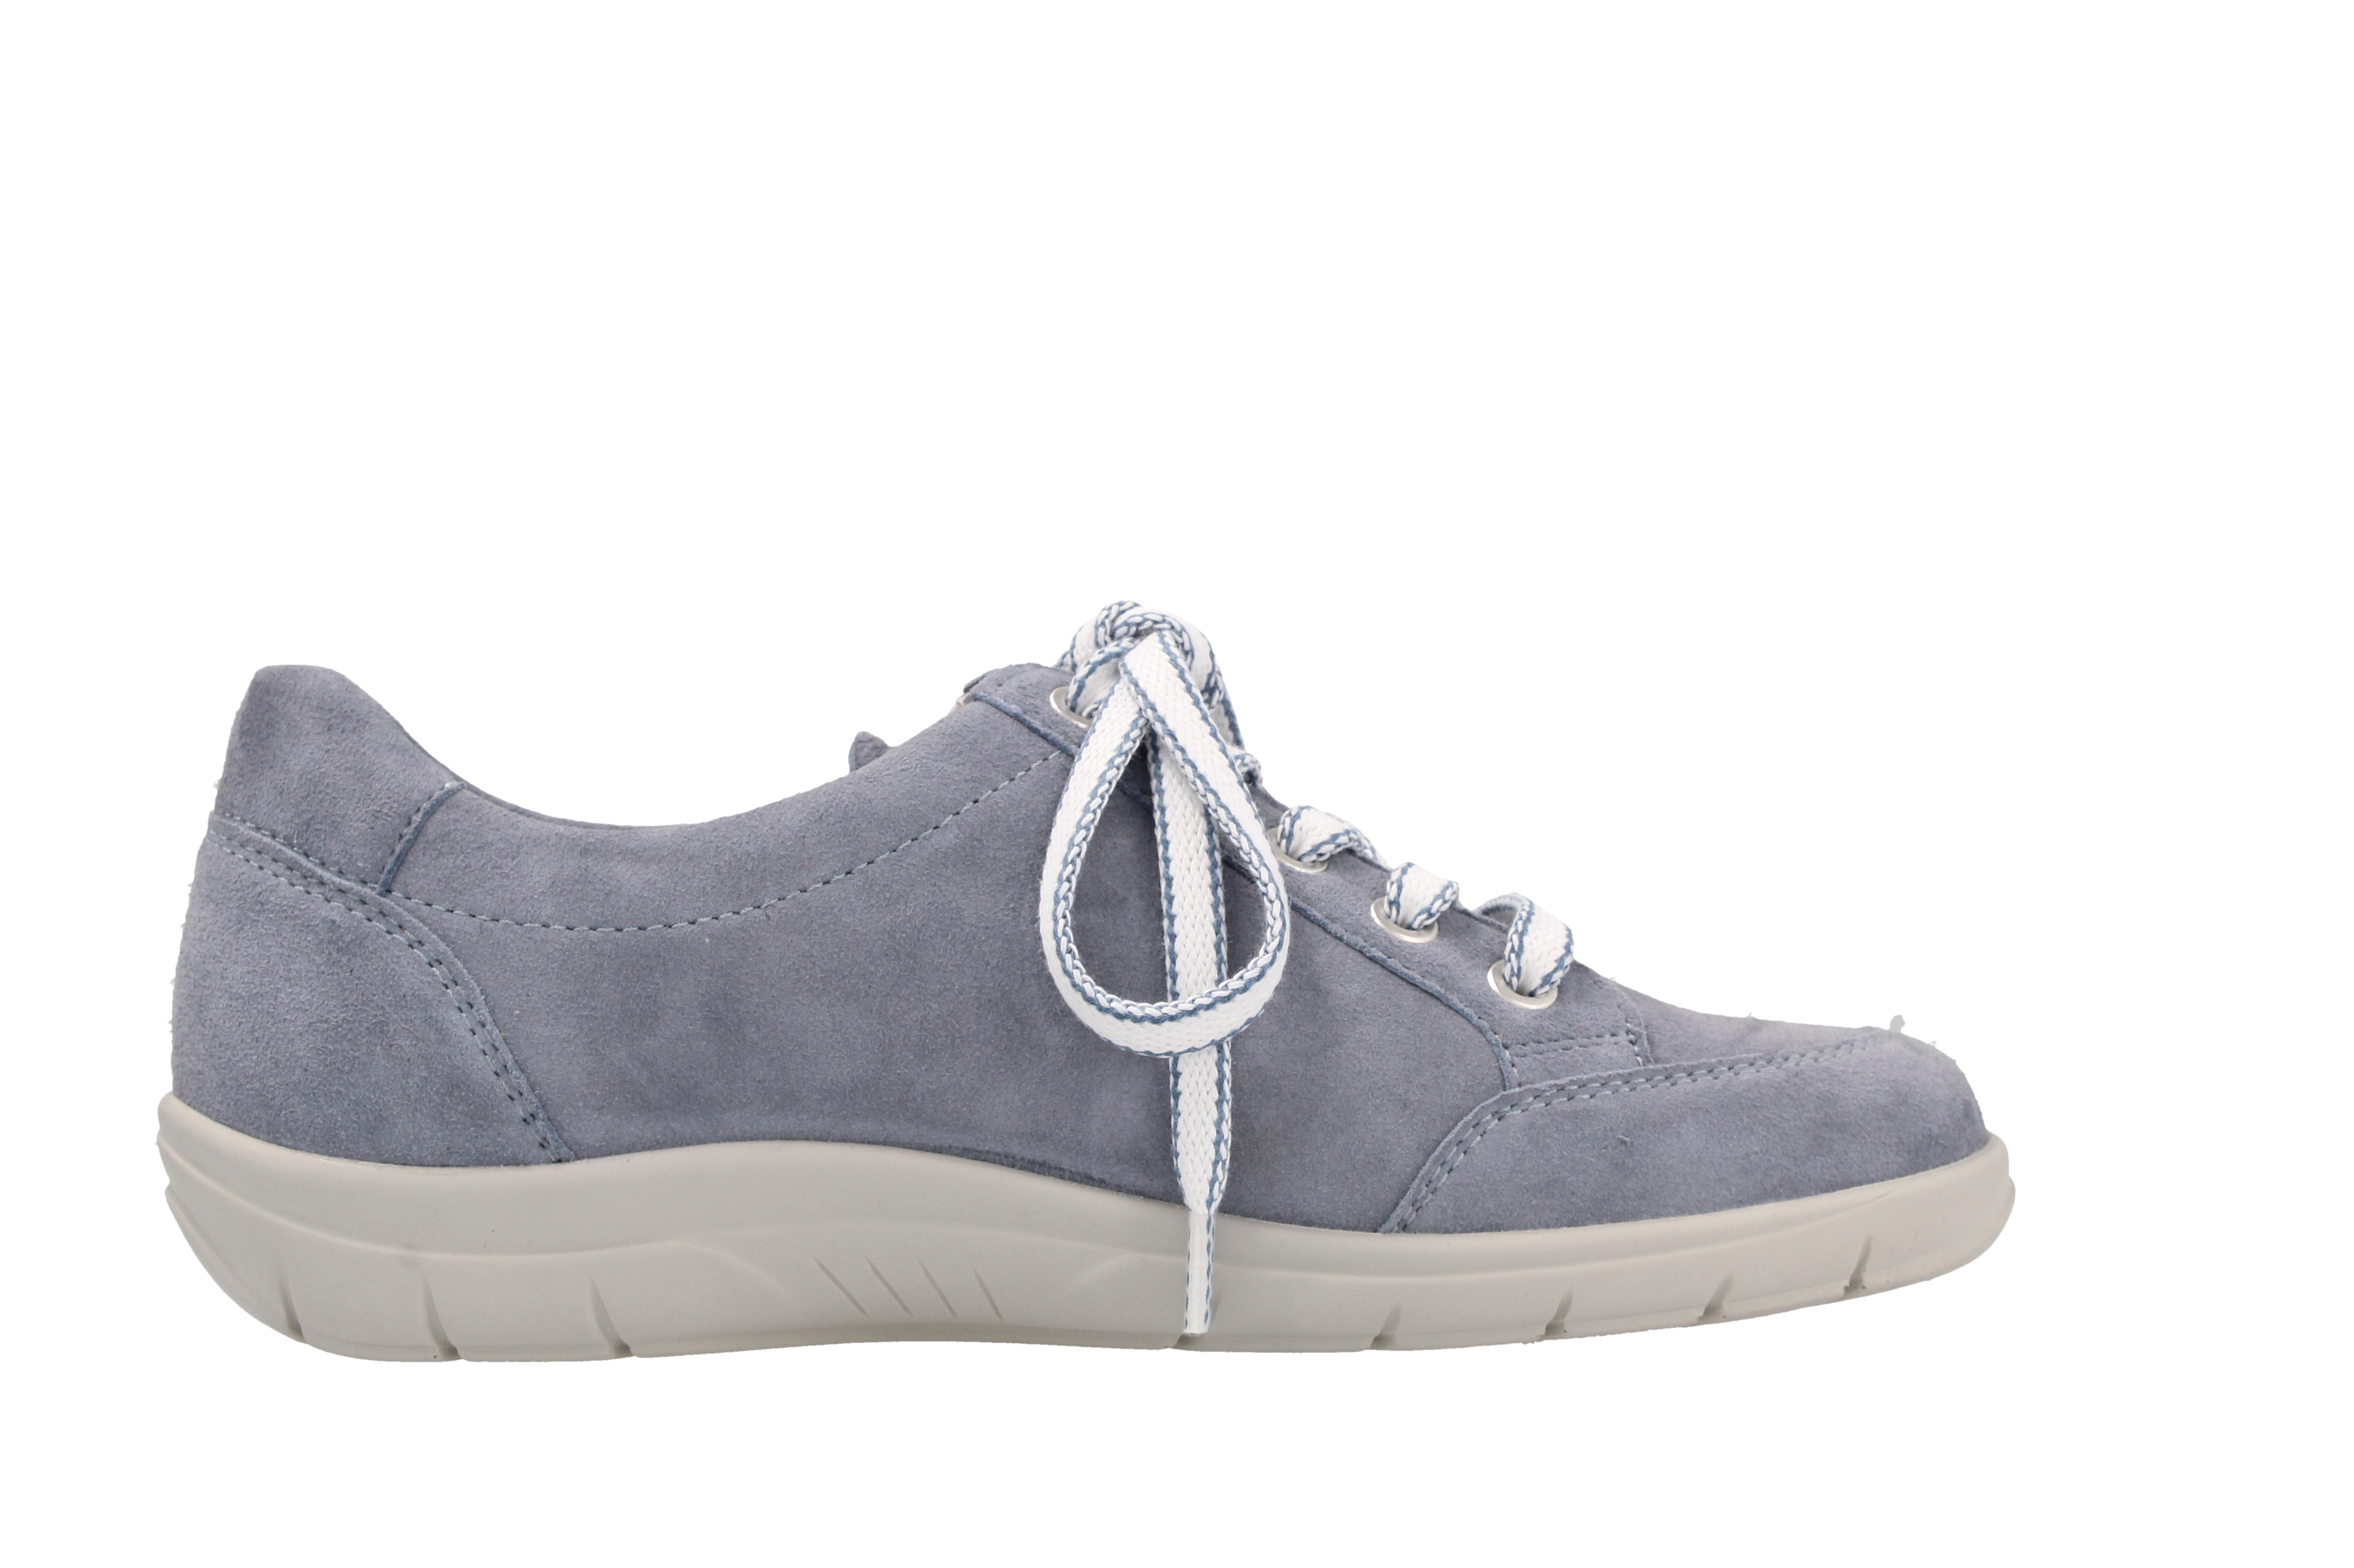 Michelle - Light blue suede leather